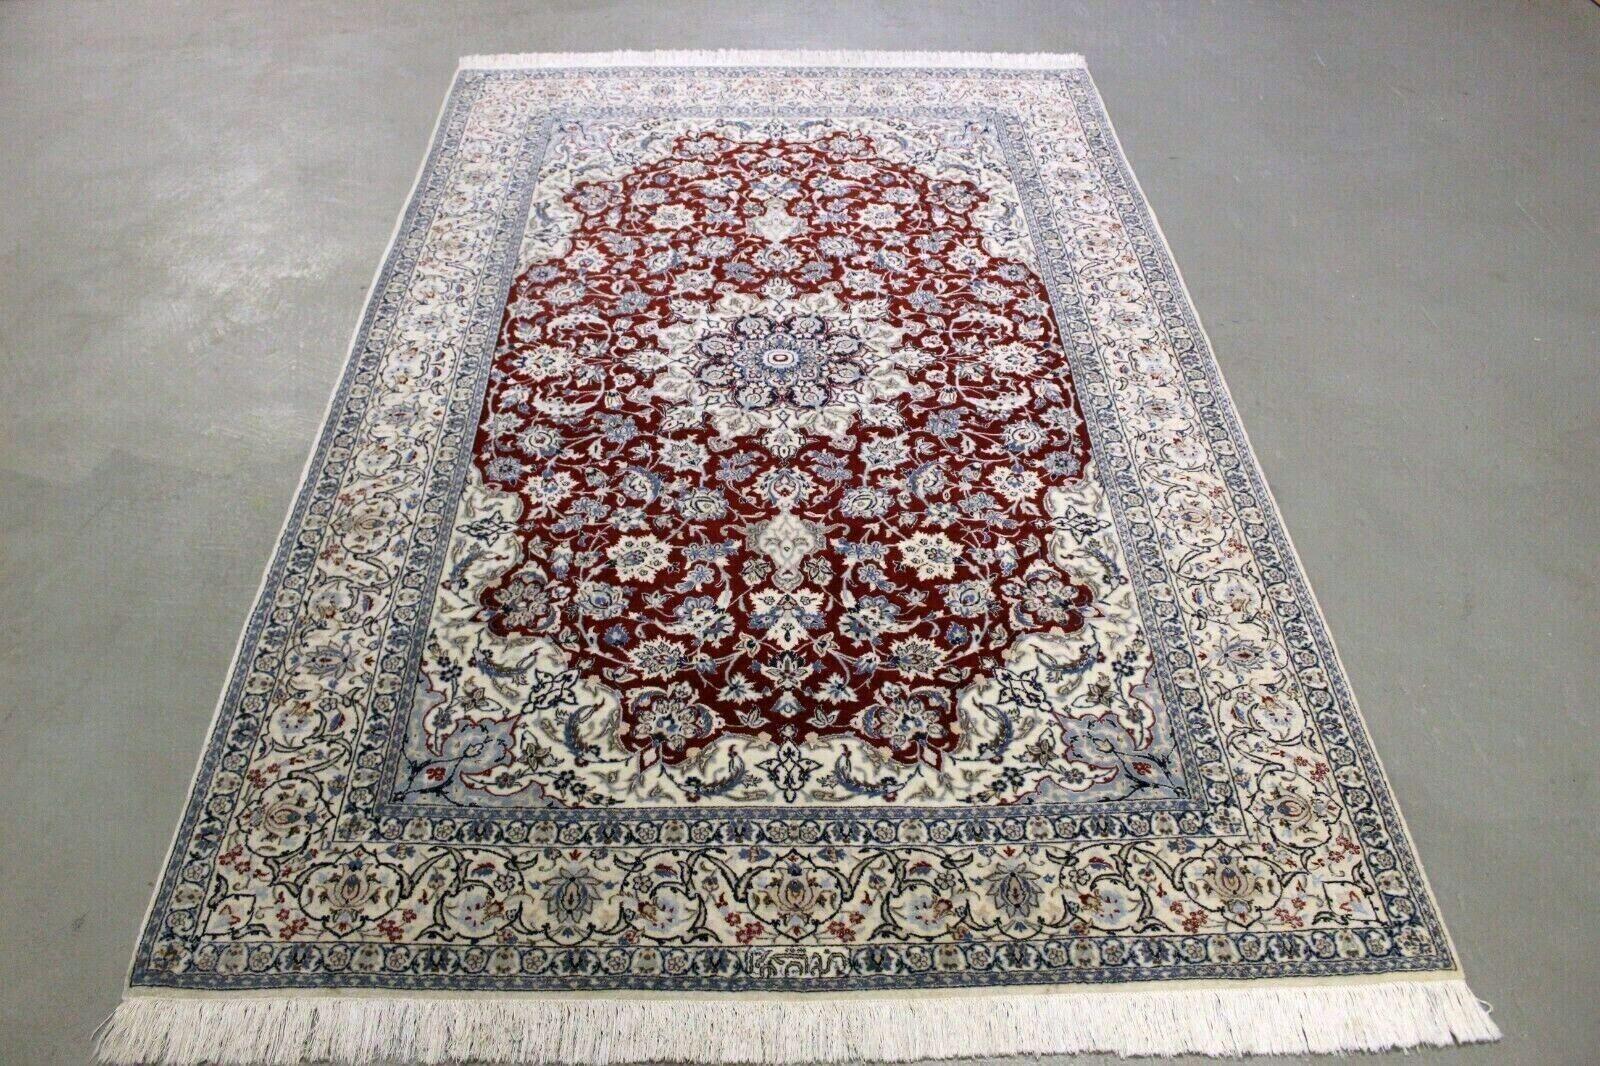 Wool Handmade Vintage Persian Style Nain Rug 4.1' x 6.3', 1970s - 1K43 For Sale